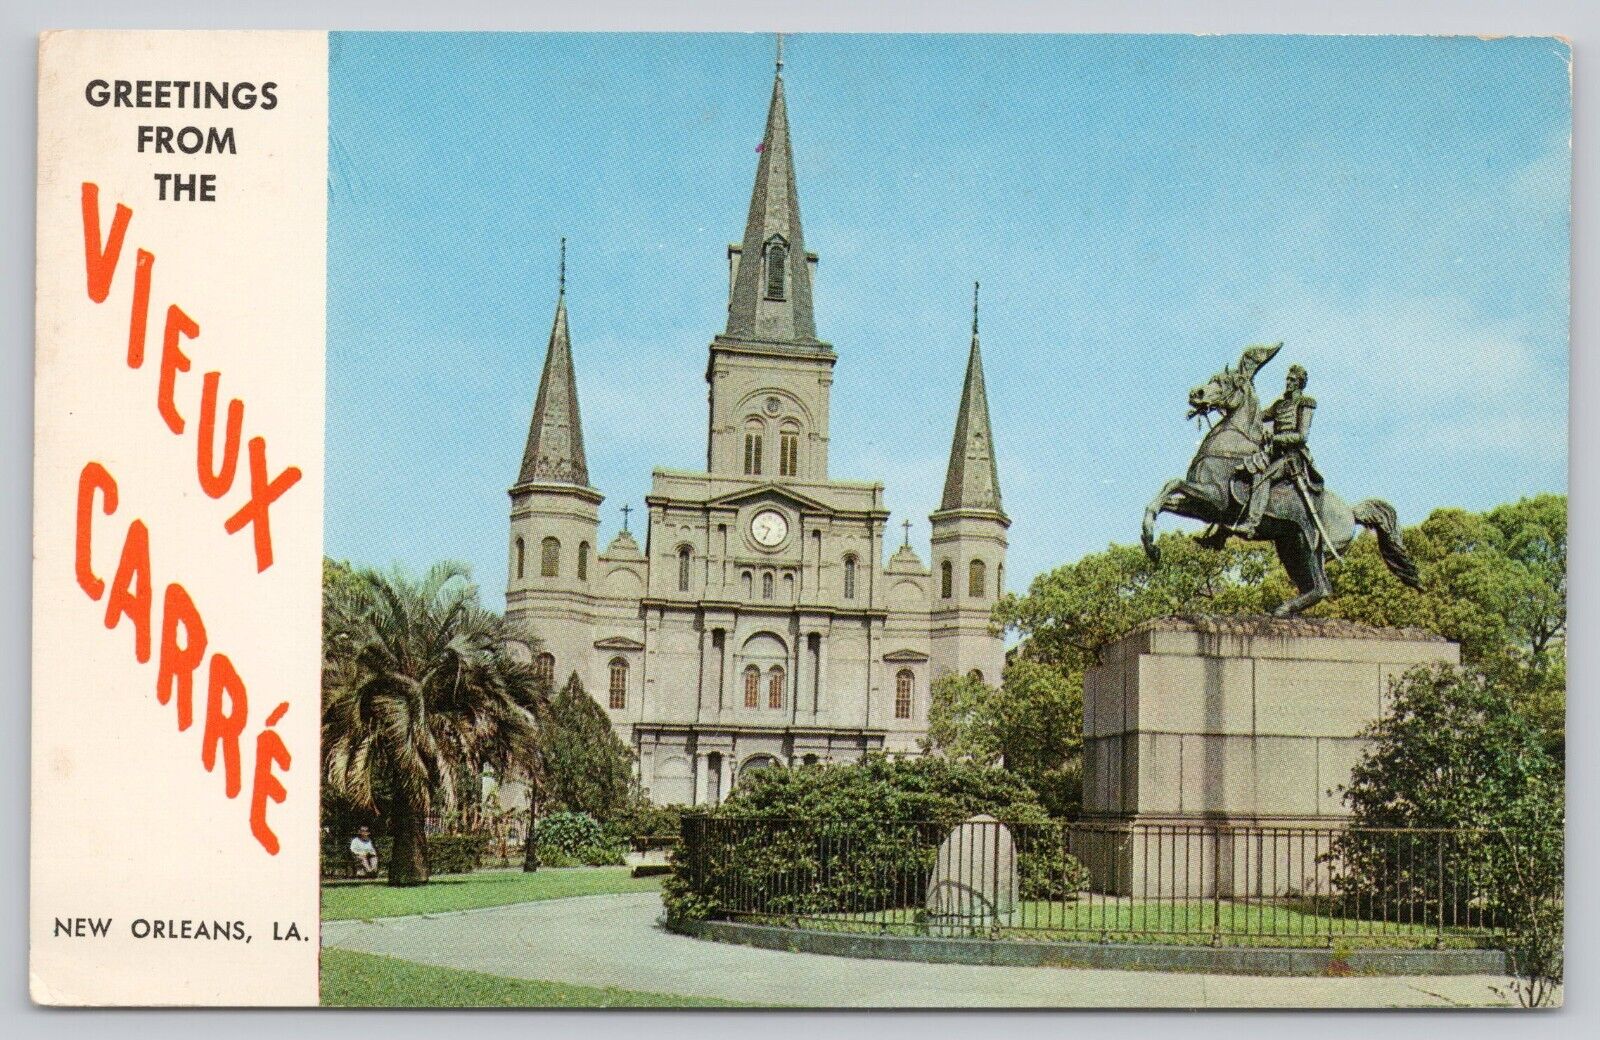 Postcard Greetings from the Vieux Carre New Orleans LA